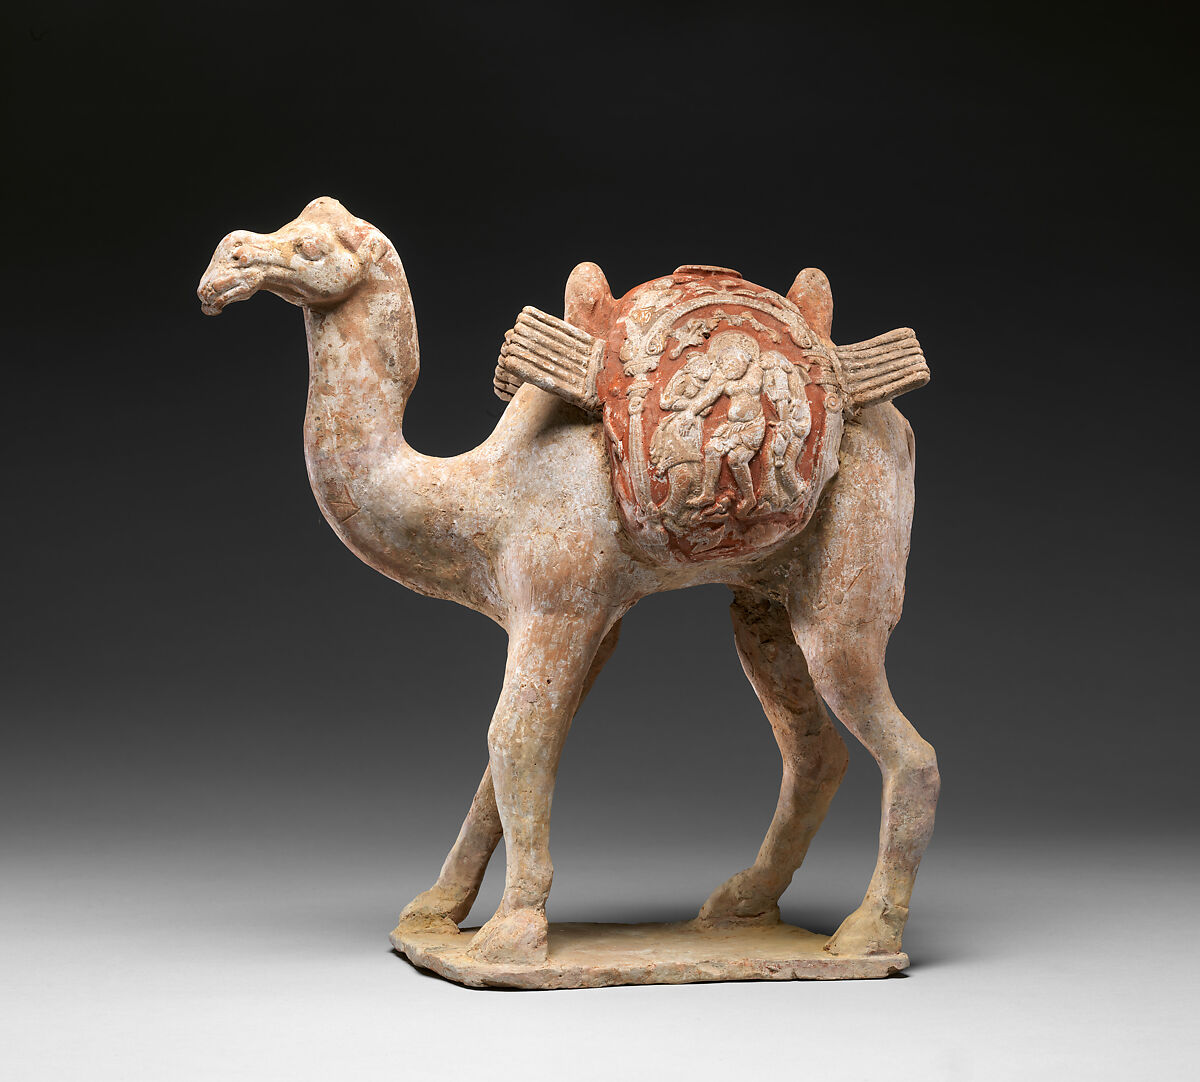 Camel with Dionysian imagery on its saddle bags, Earthenware with appliqué relief decoration and pigment, China 